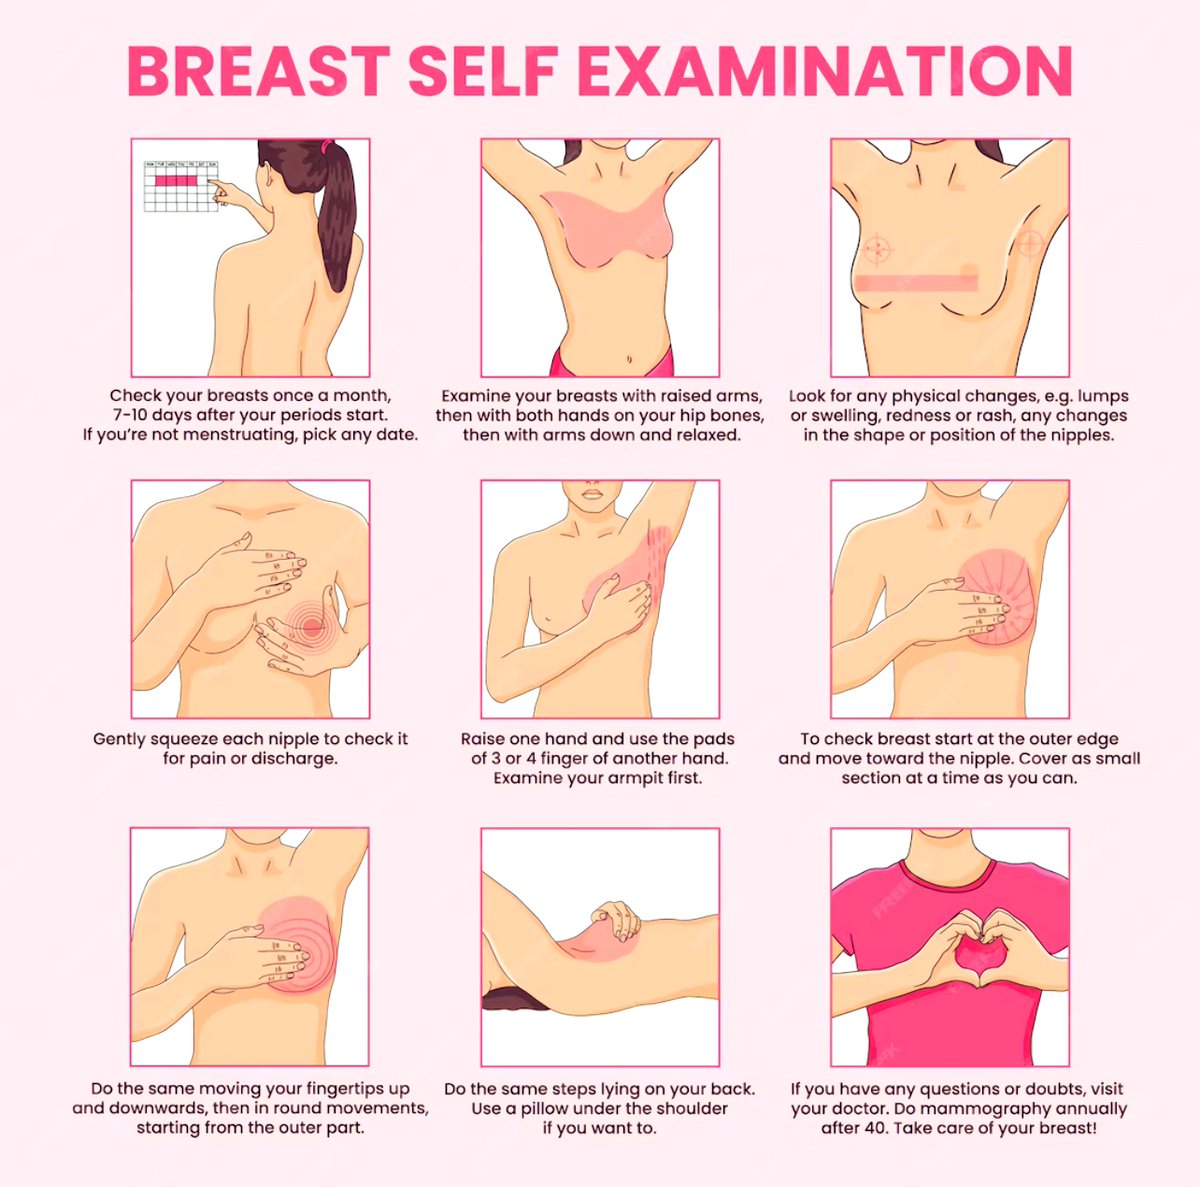 LADIES!!!
Breast self-exams can make all the difference. Knowing your body & catching changes early can lead to better outcomes. This step-by-step guide shows how to examine not just the breast, but also the armpit for lumps or irregularities. Make this a monthly habit🙏🏻